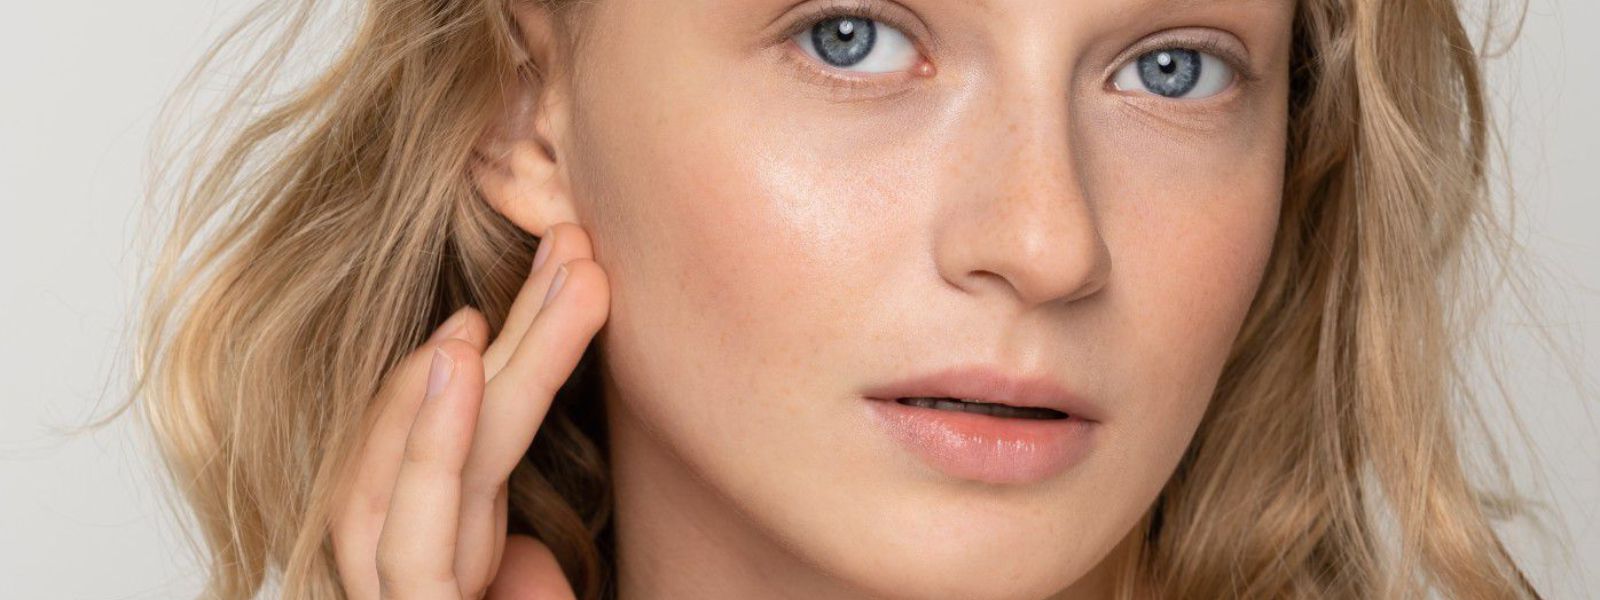 What Is Kybella Used For?